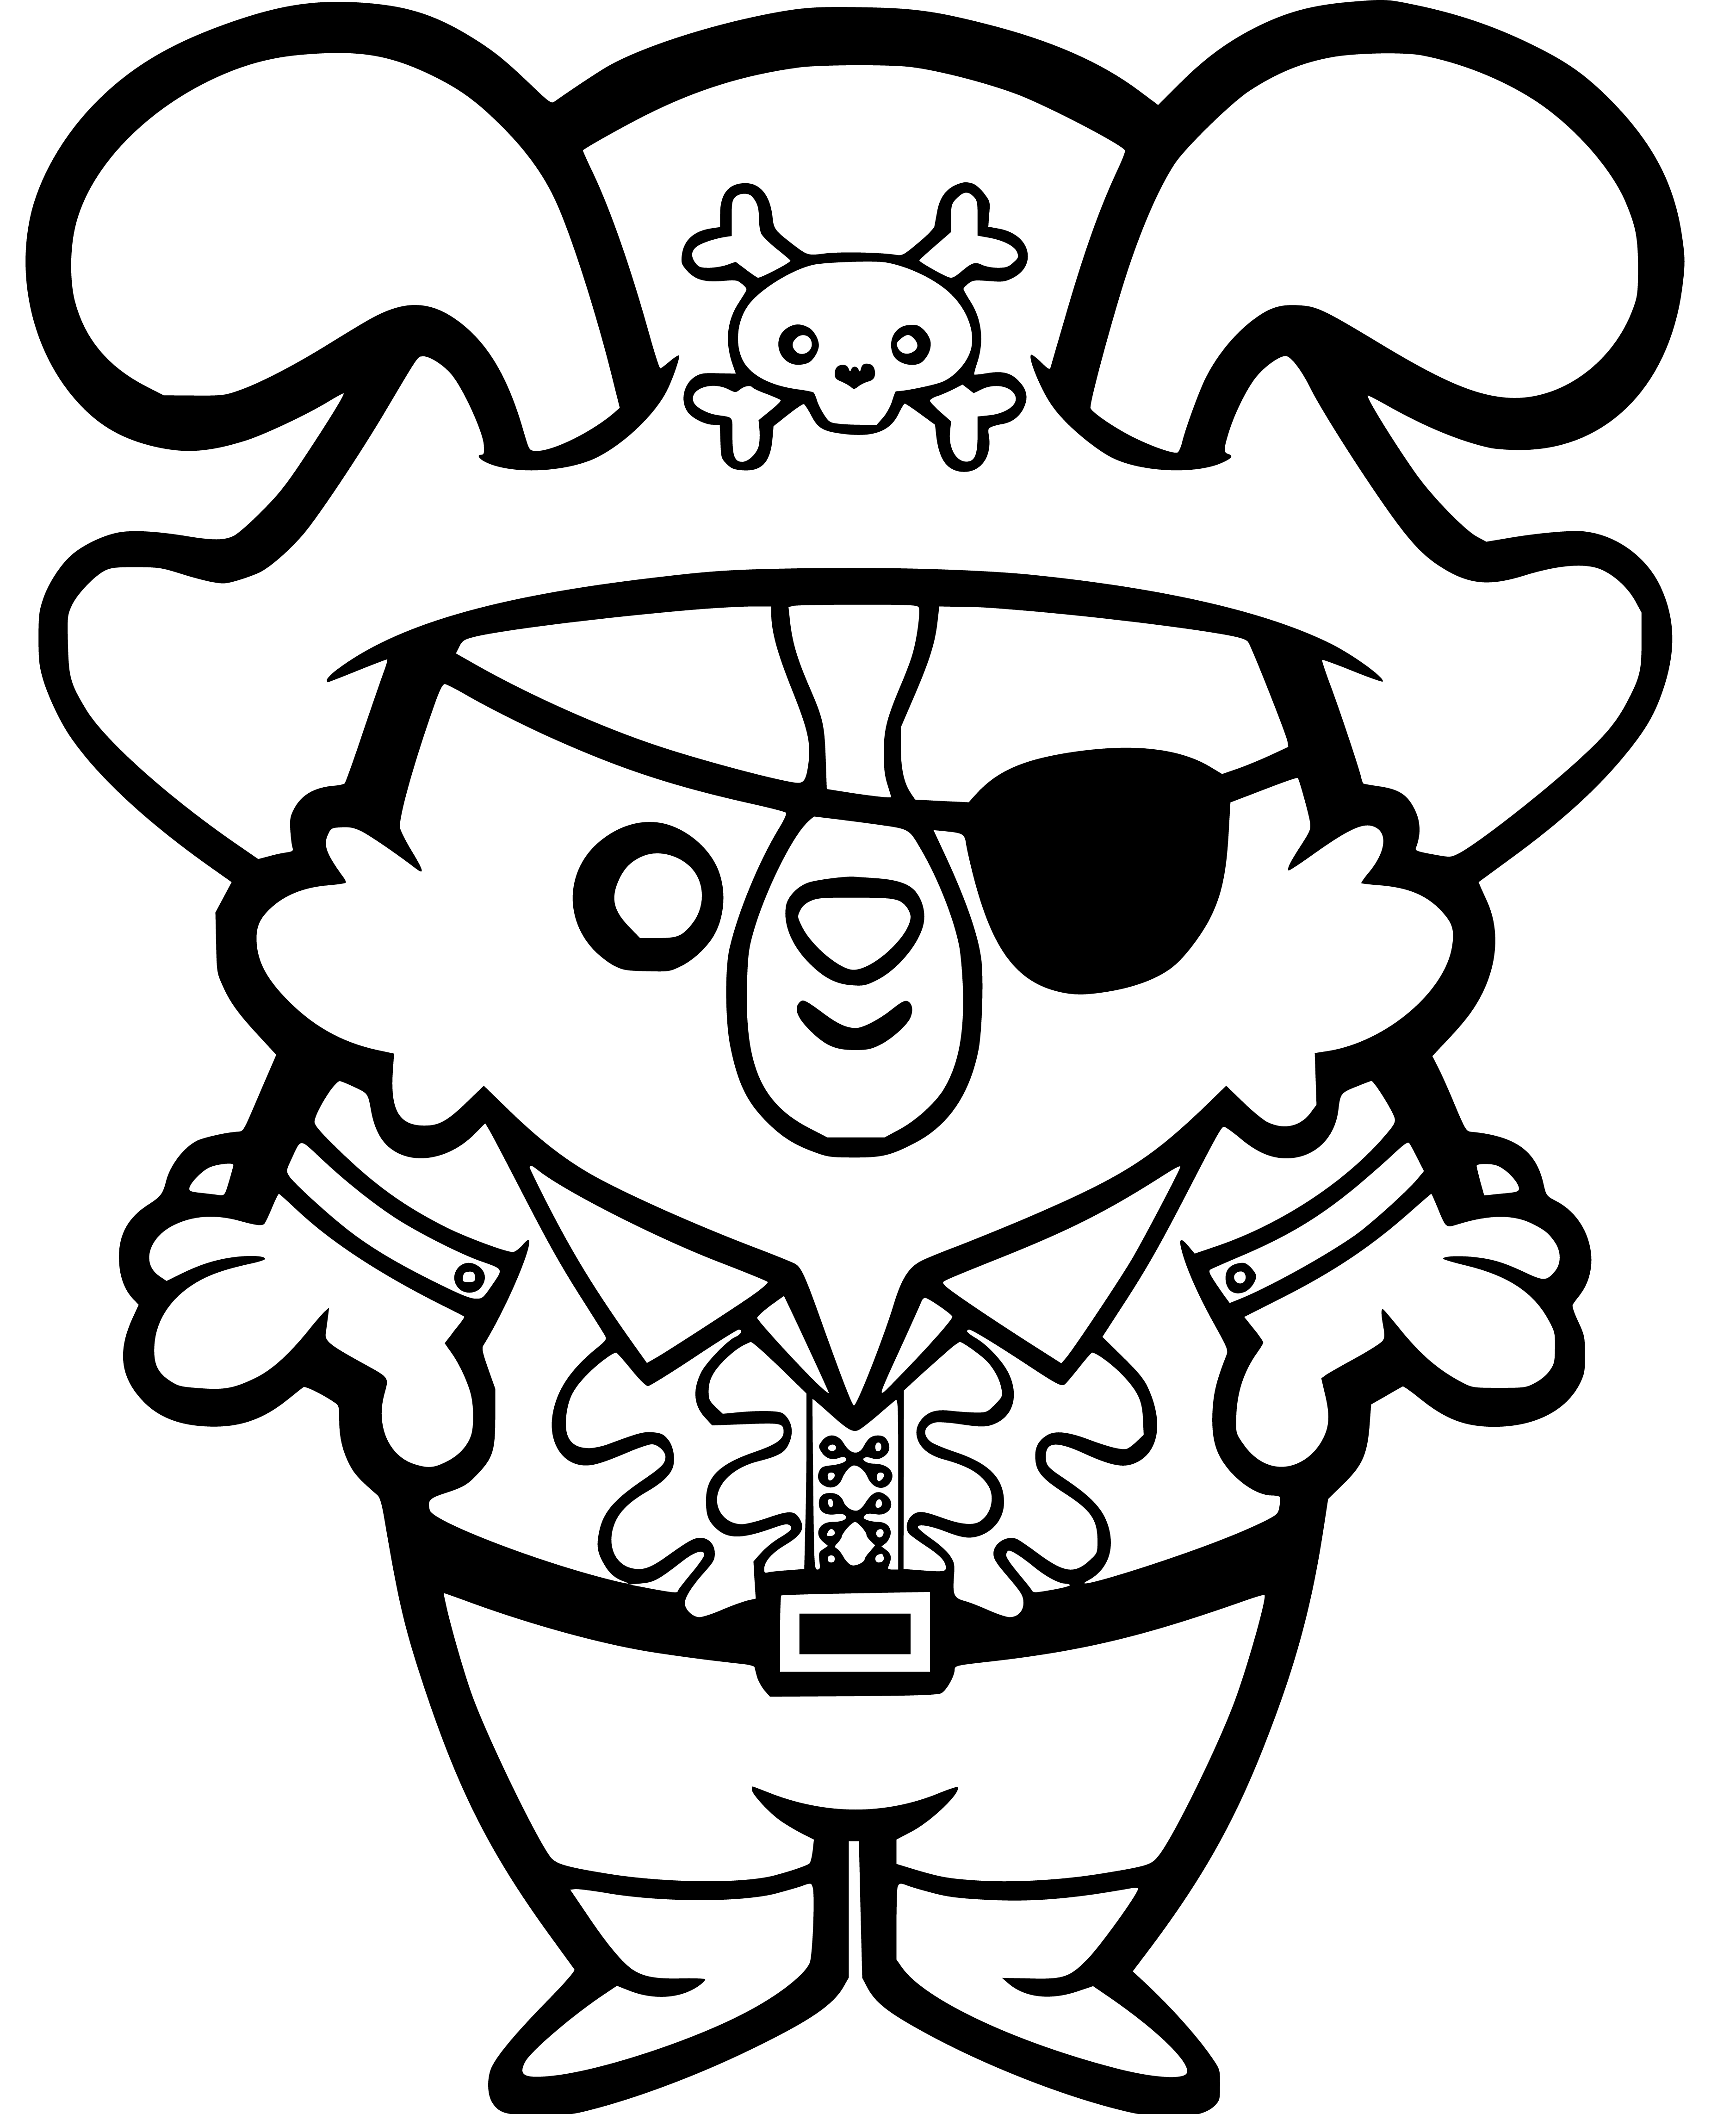 Little Kid Pirate Coloring Pages Printable - SheetalColor.com